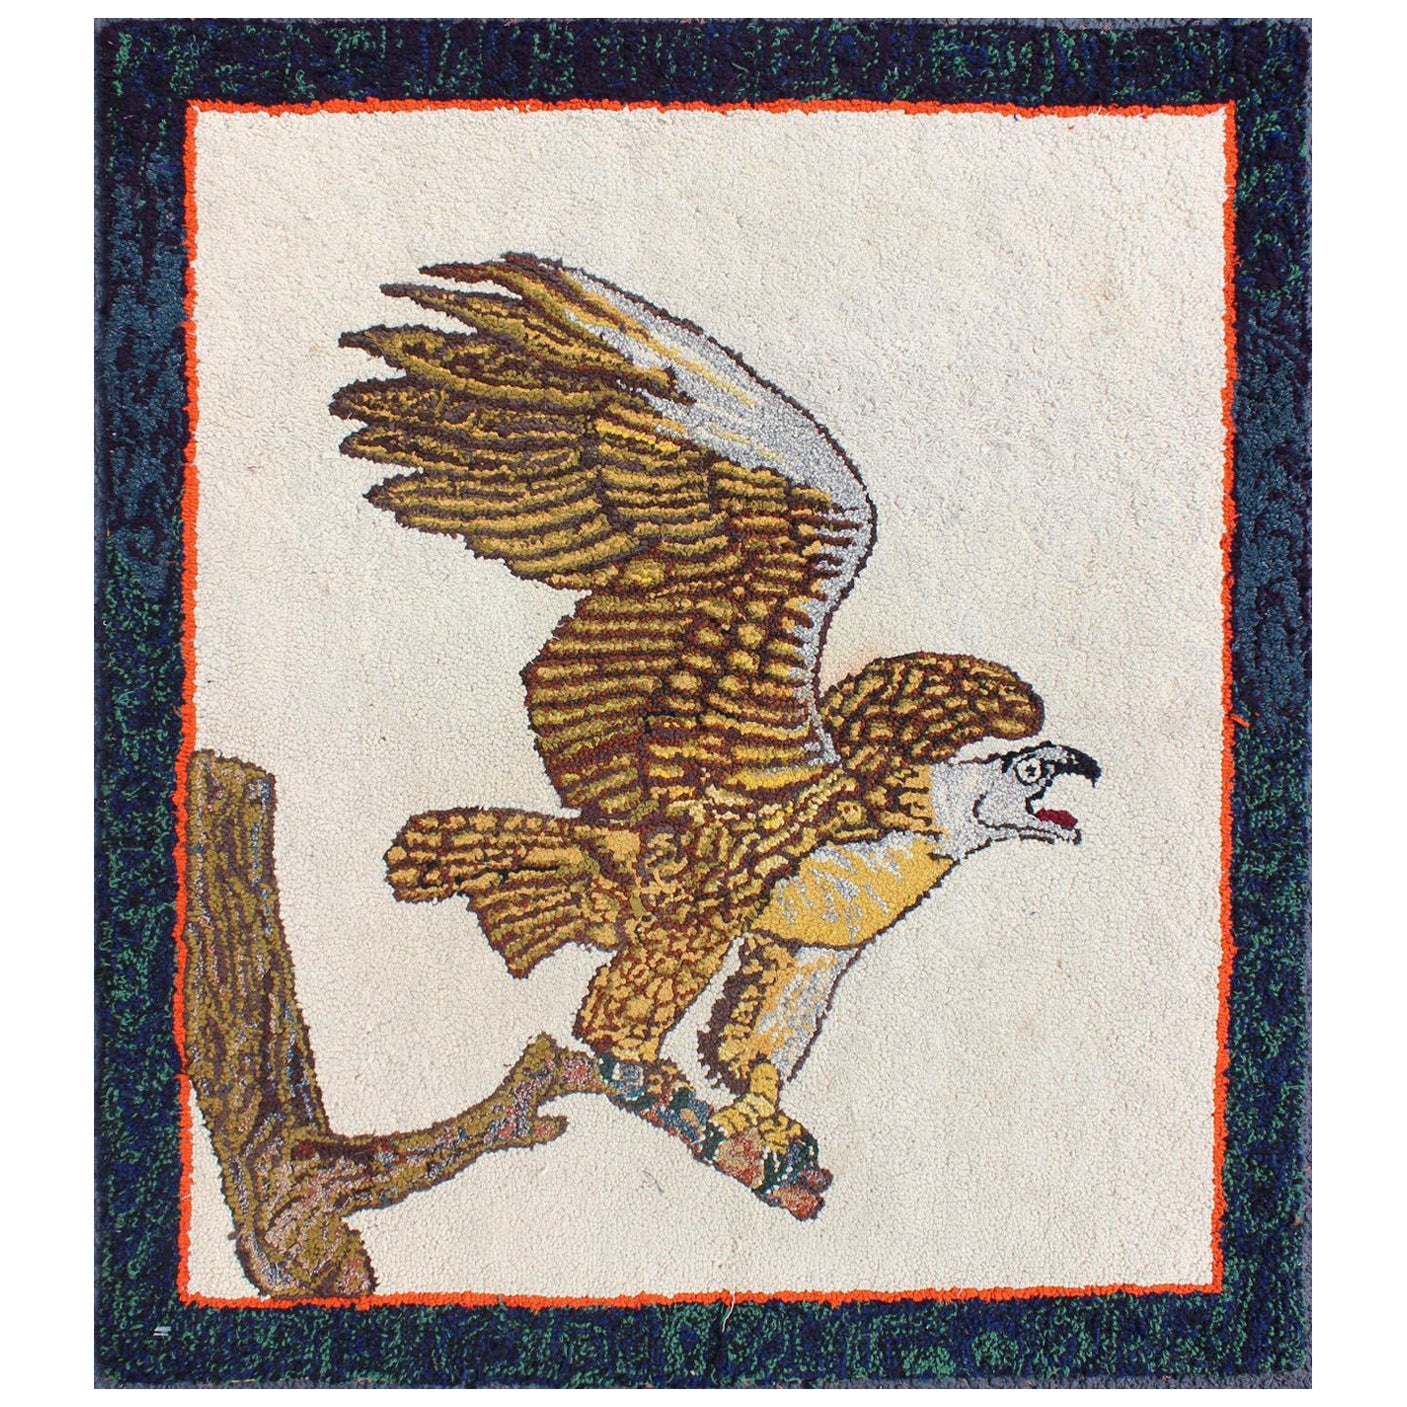 Pictorial Antique American Hooked Rug Of A American Bald Eagle Hooked Rug For Sale